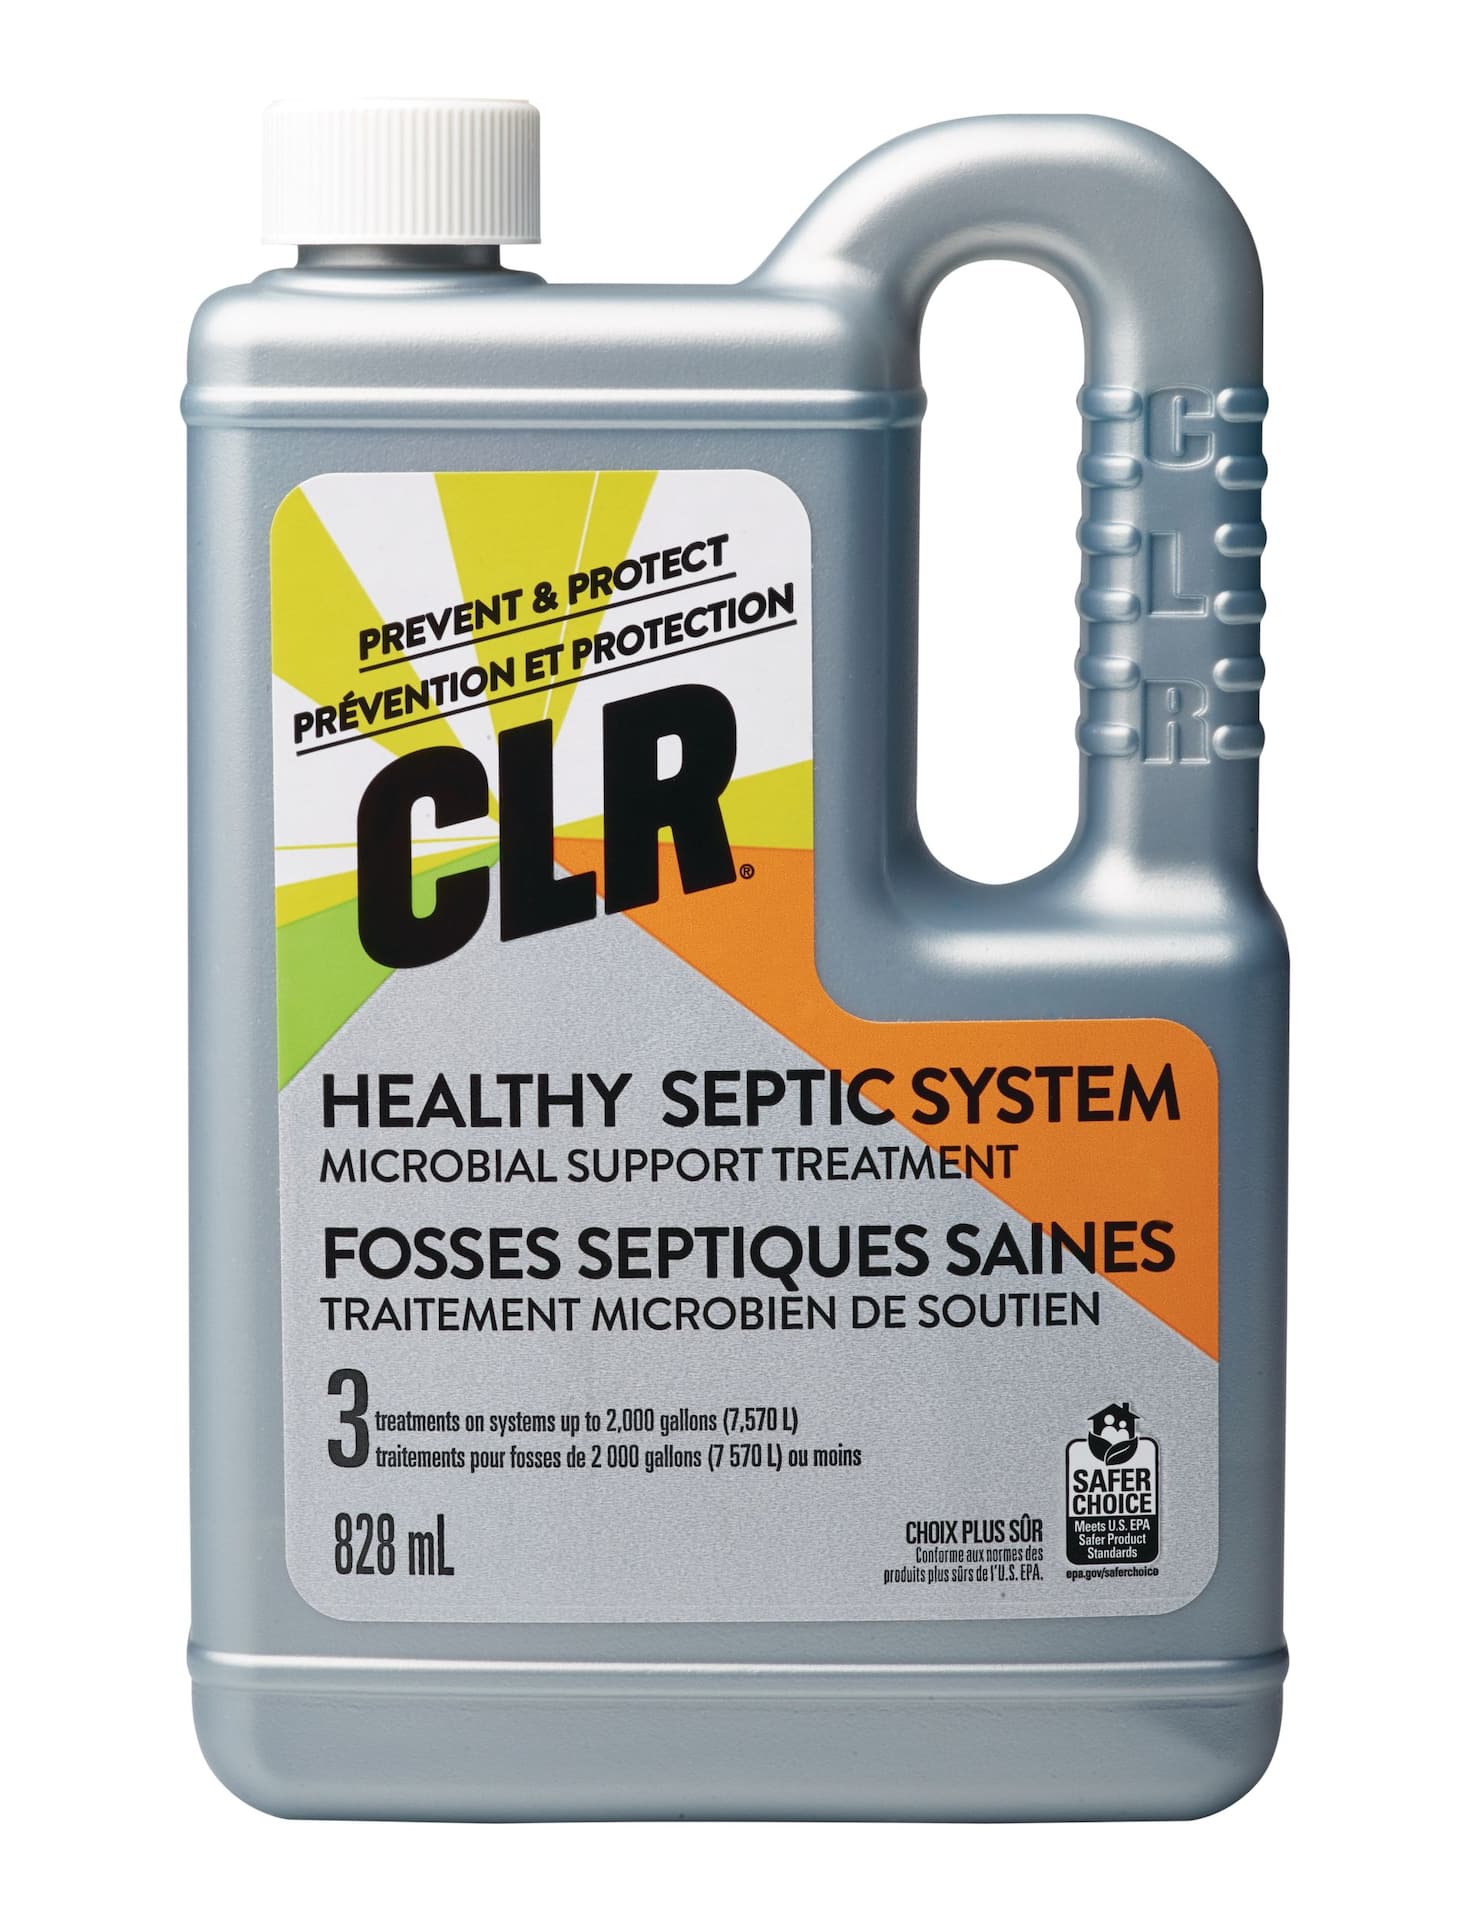 Septic Tank Treatment - 1 Year Supply of Septic Safe Dissolvable